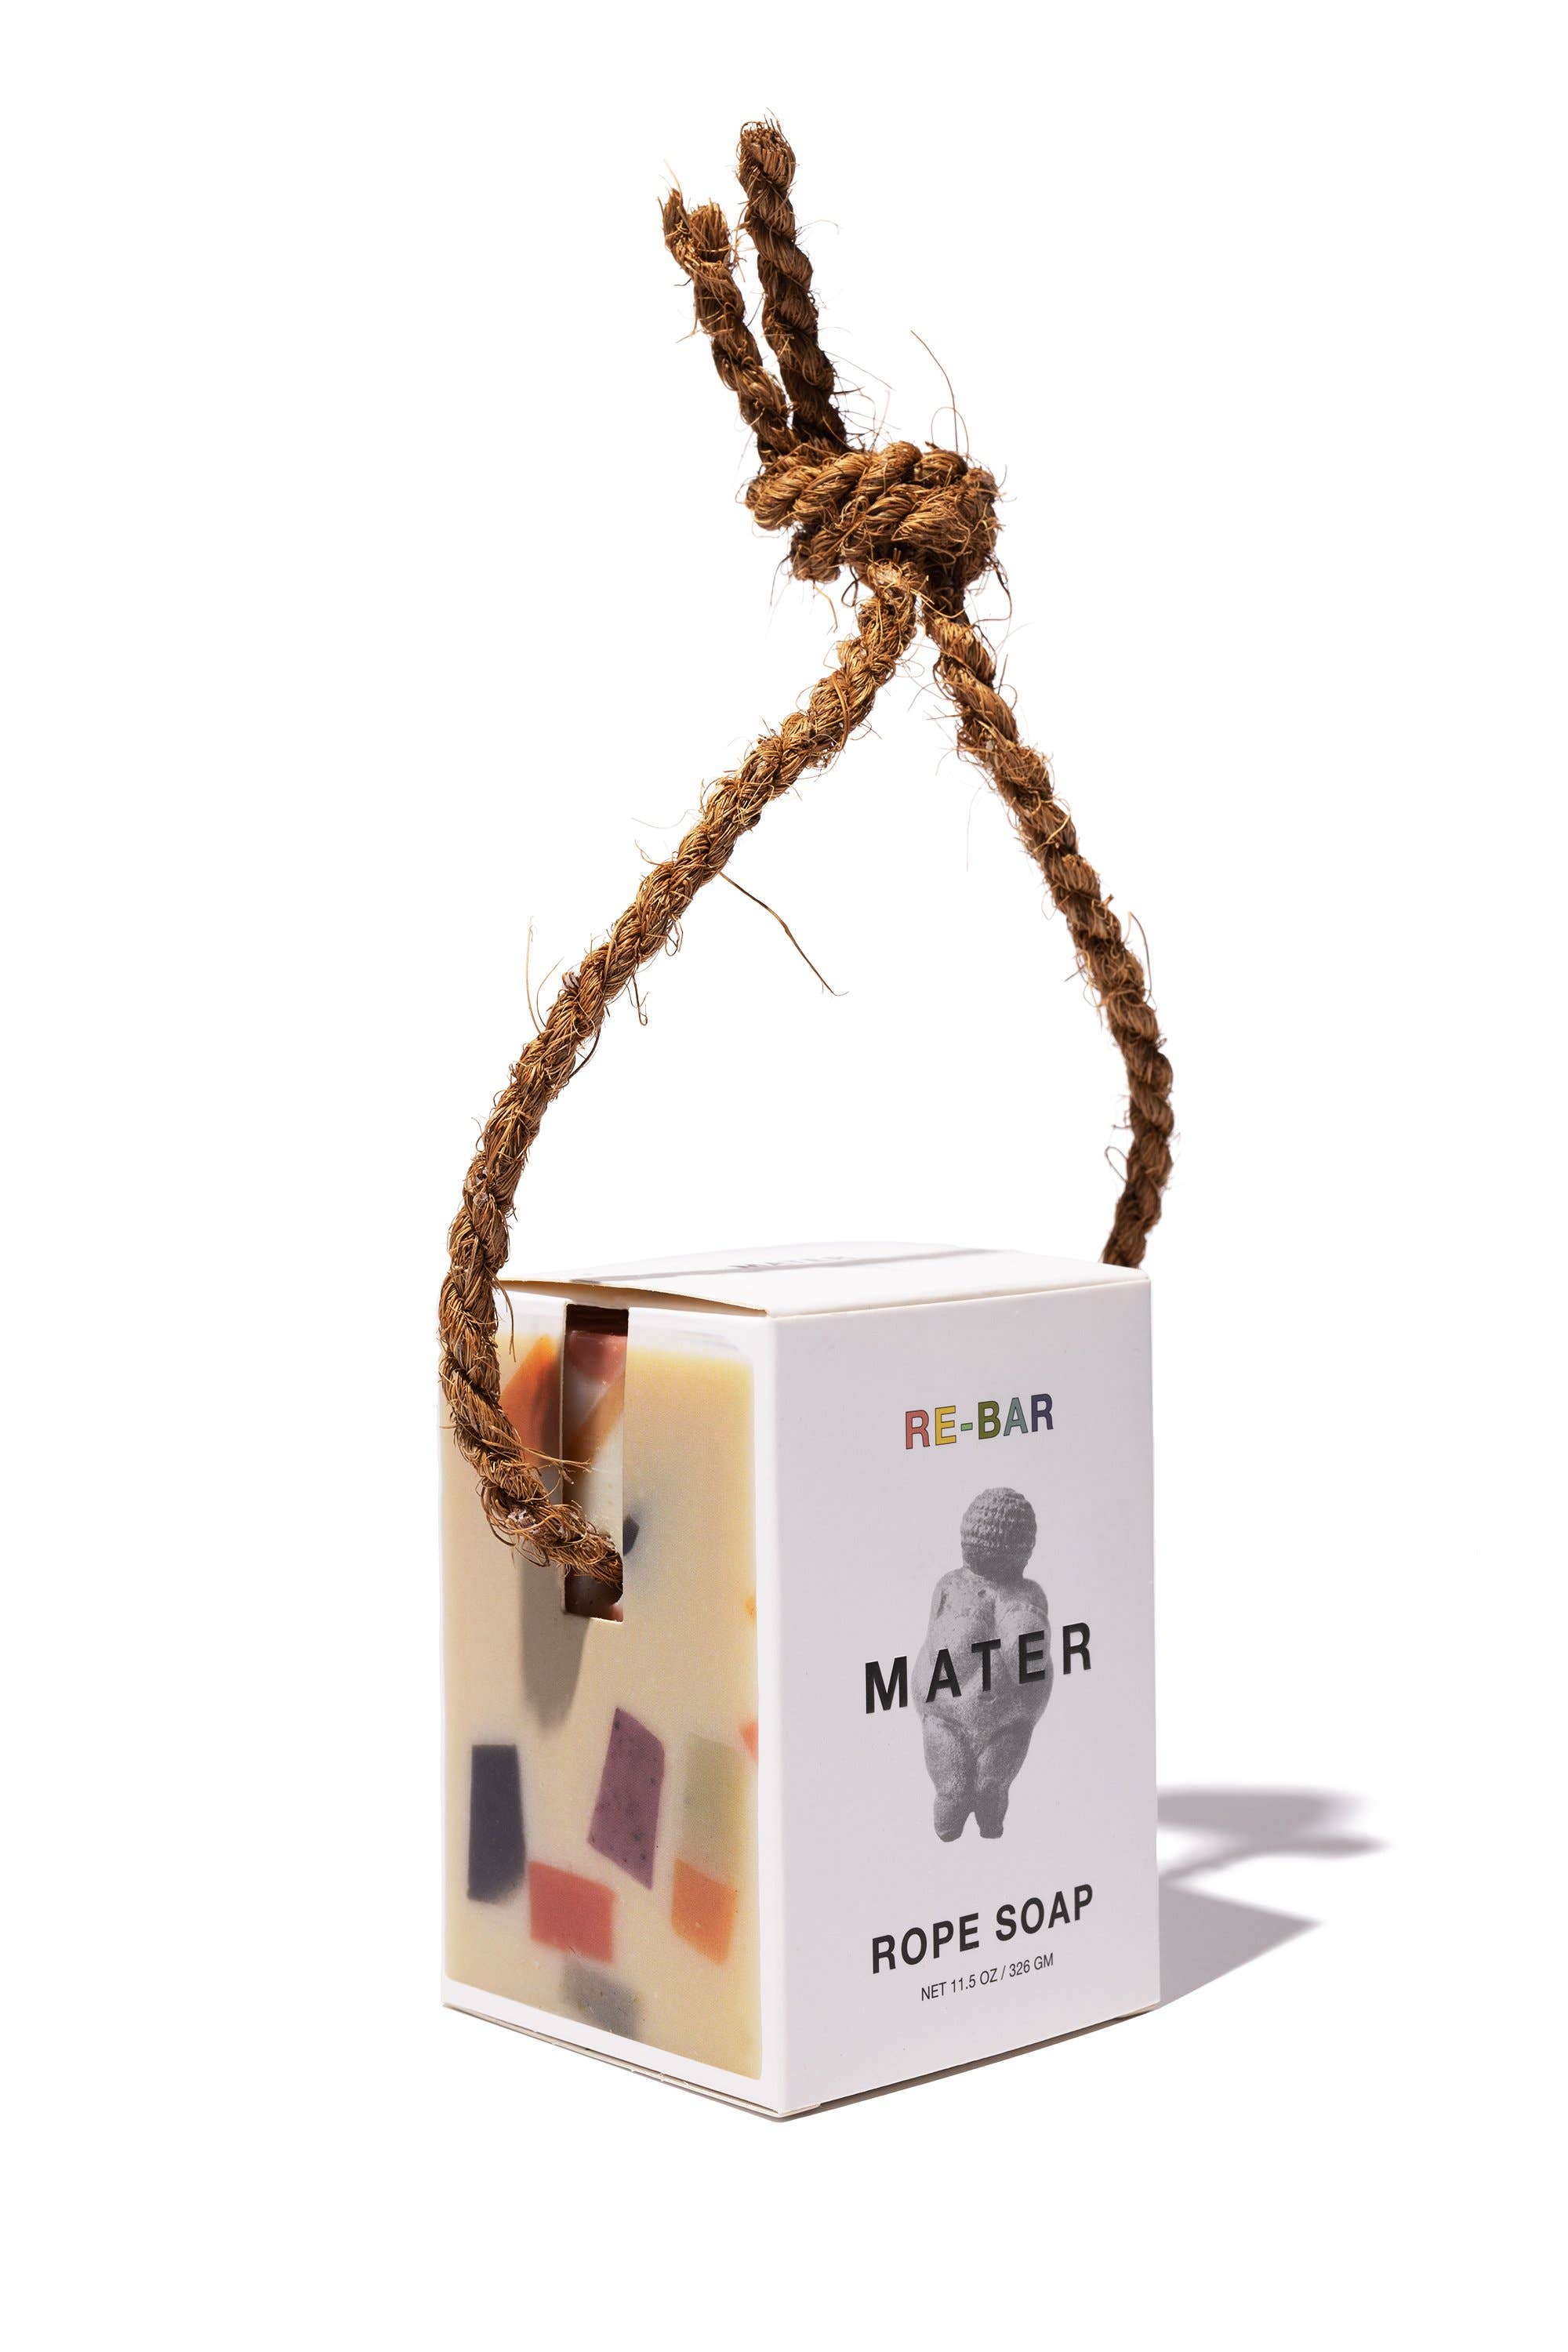 Mater Soap Re-bar Rope Soap